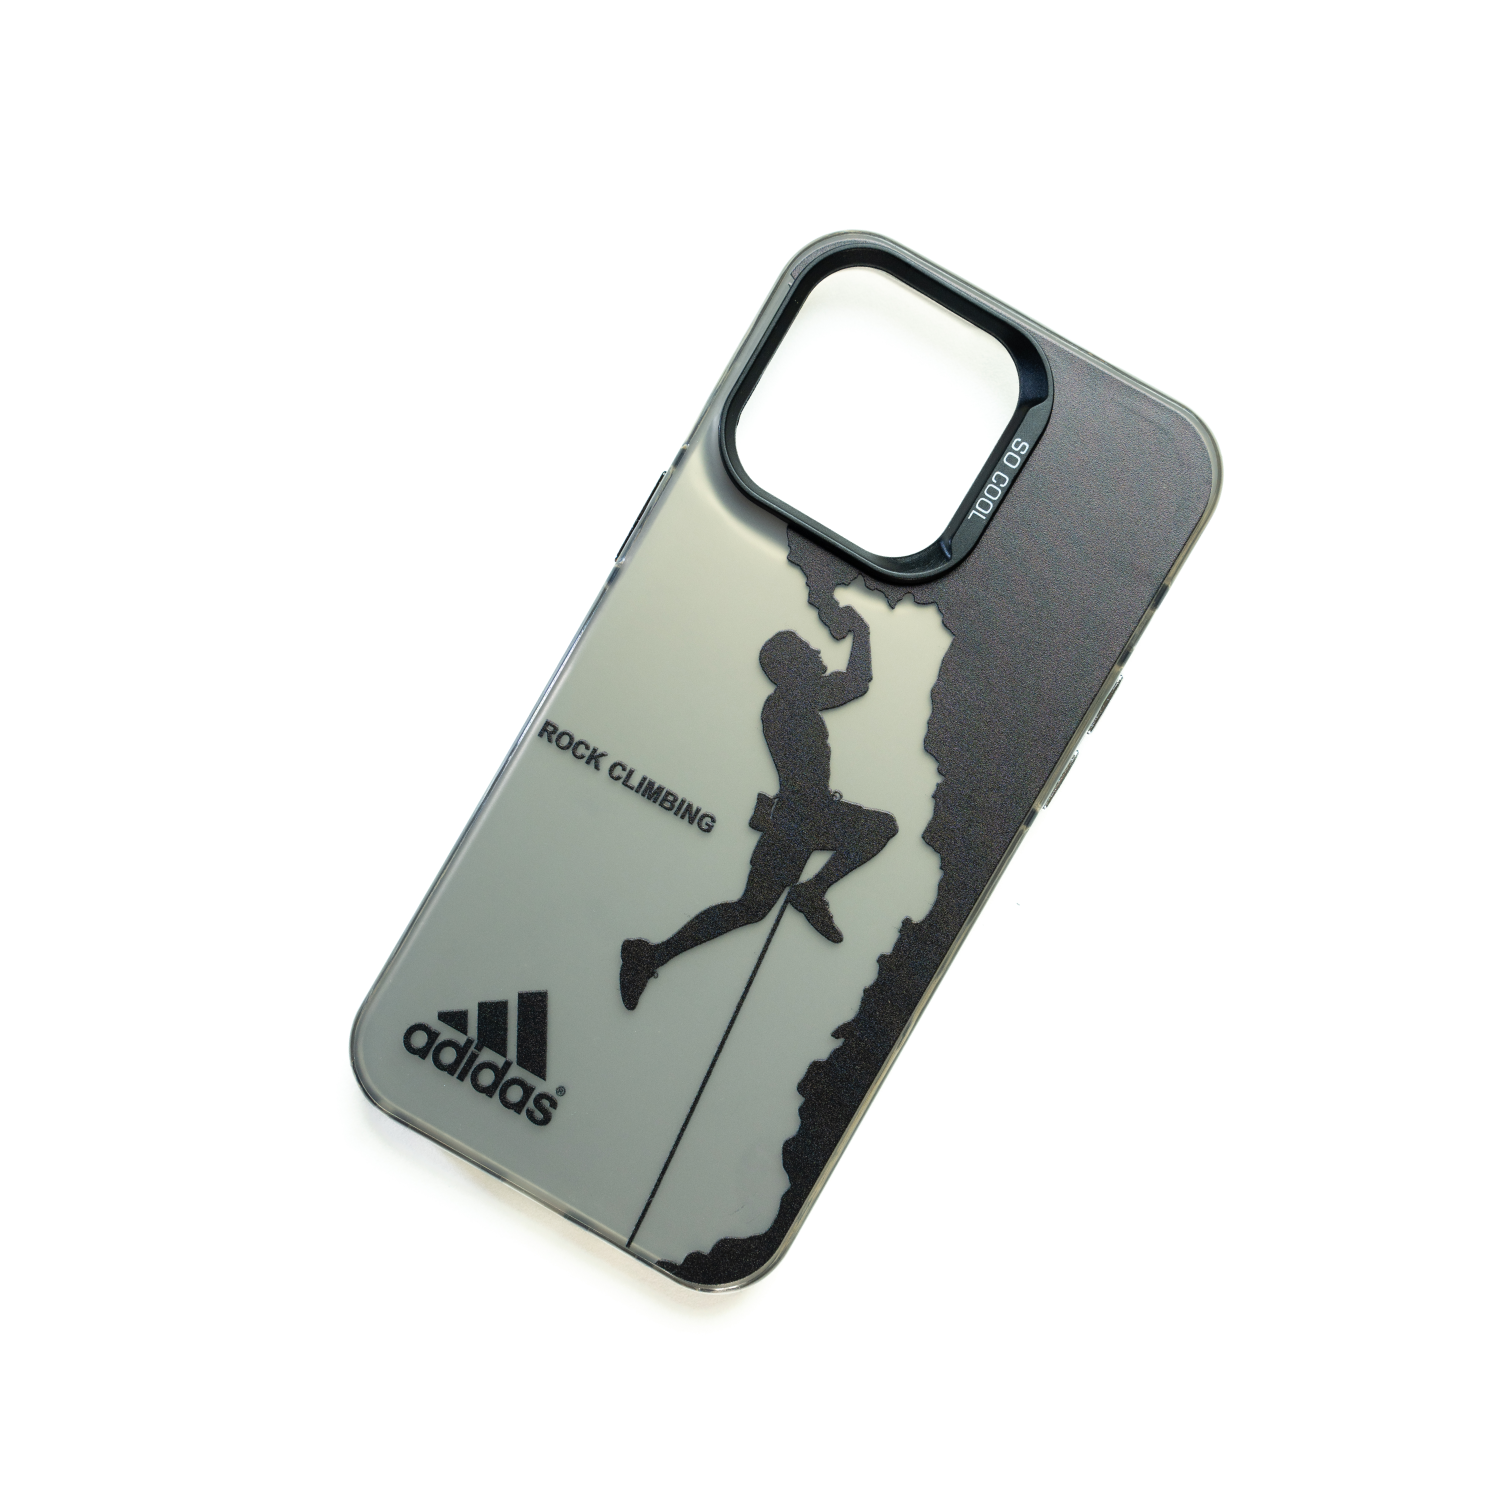 Iphone Case - So Cool Series - Addidas